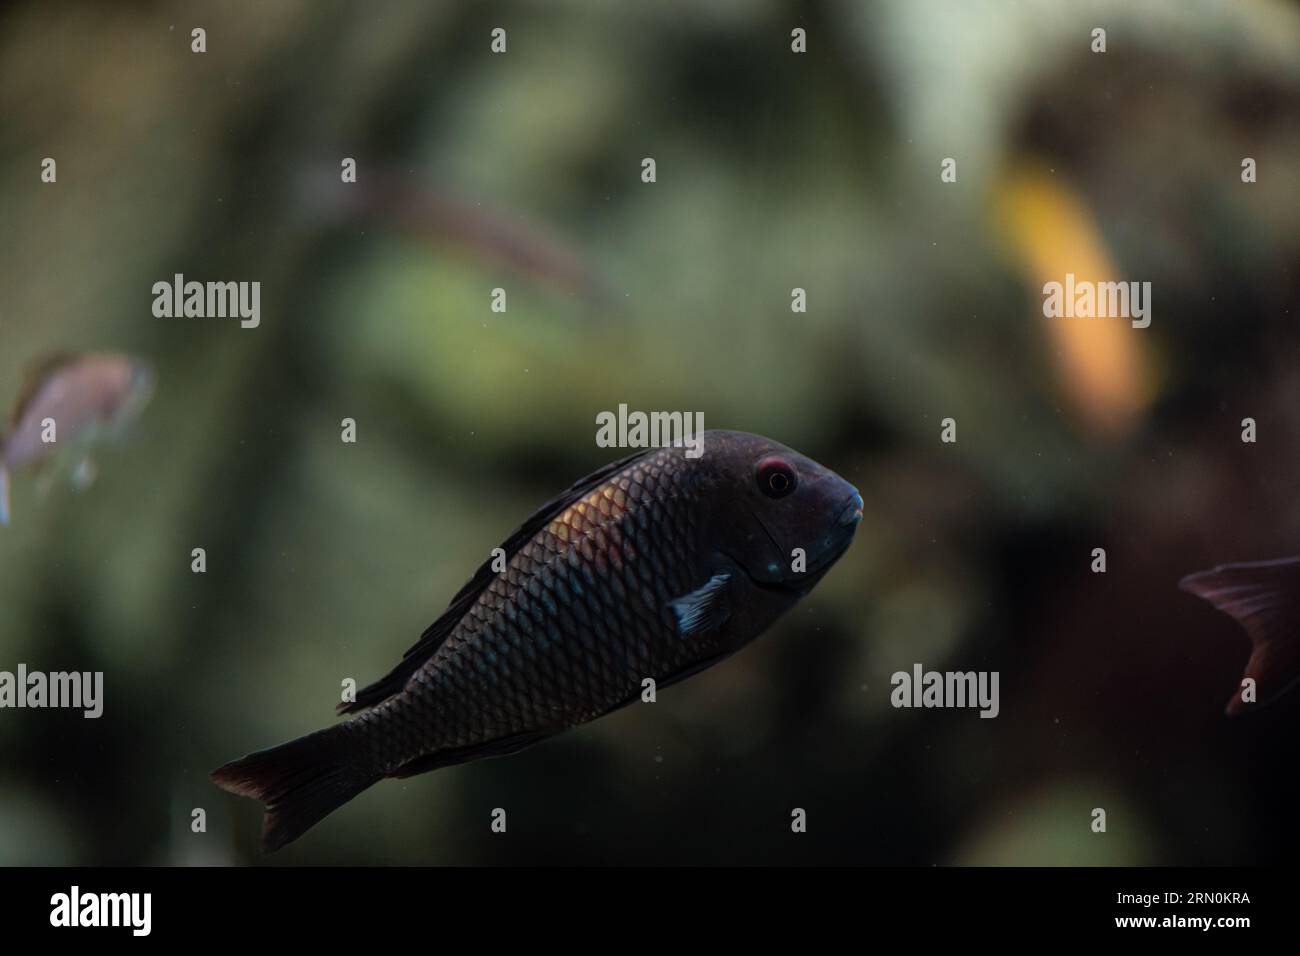 Aquarium fish from Cichlidae family. Close up imagewith copy space for text Stock Photo